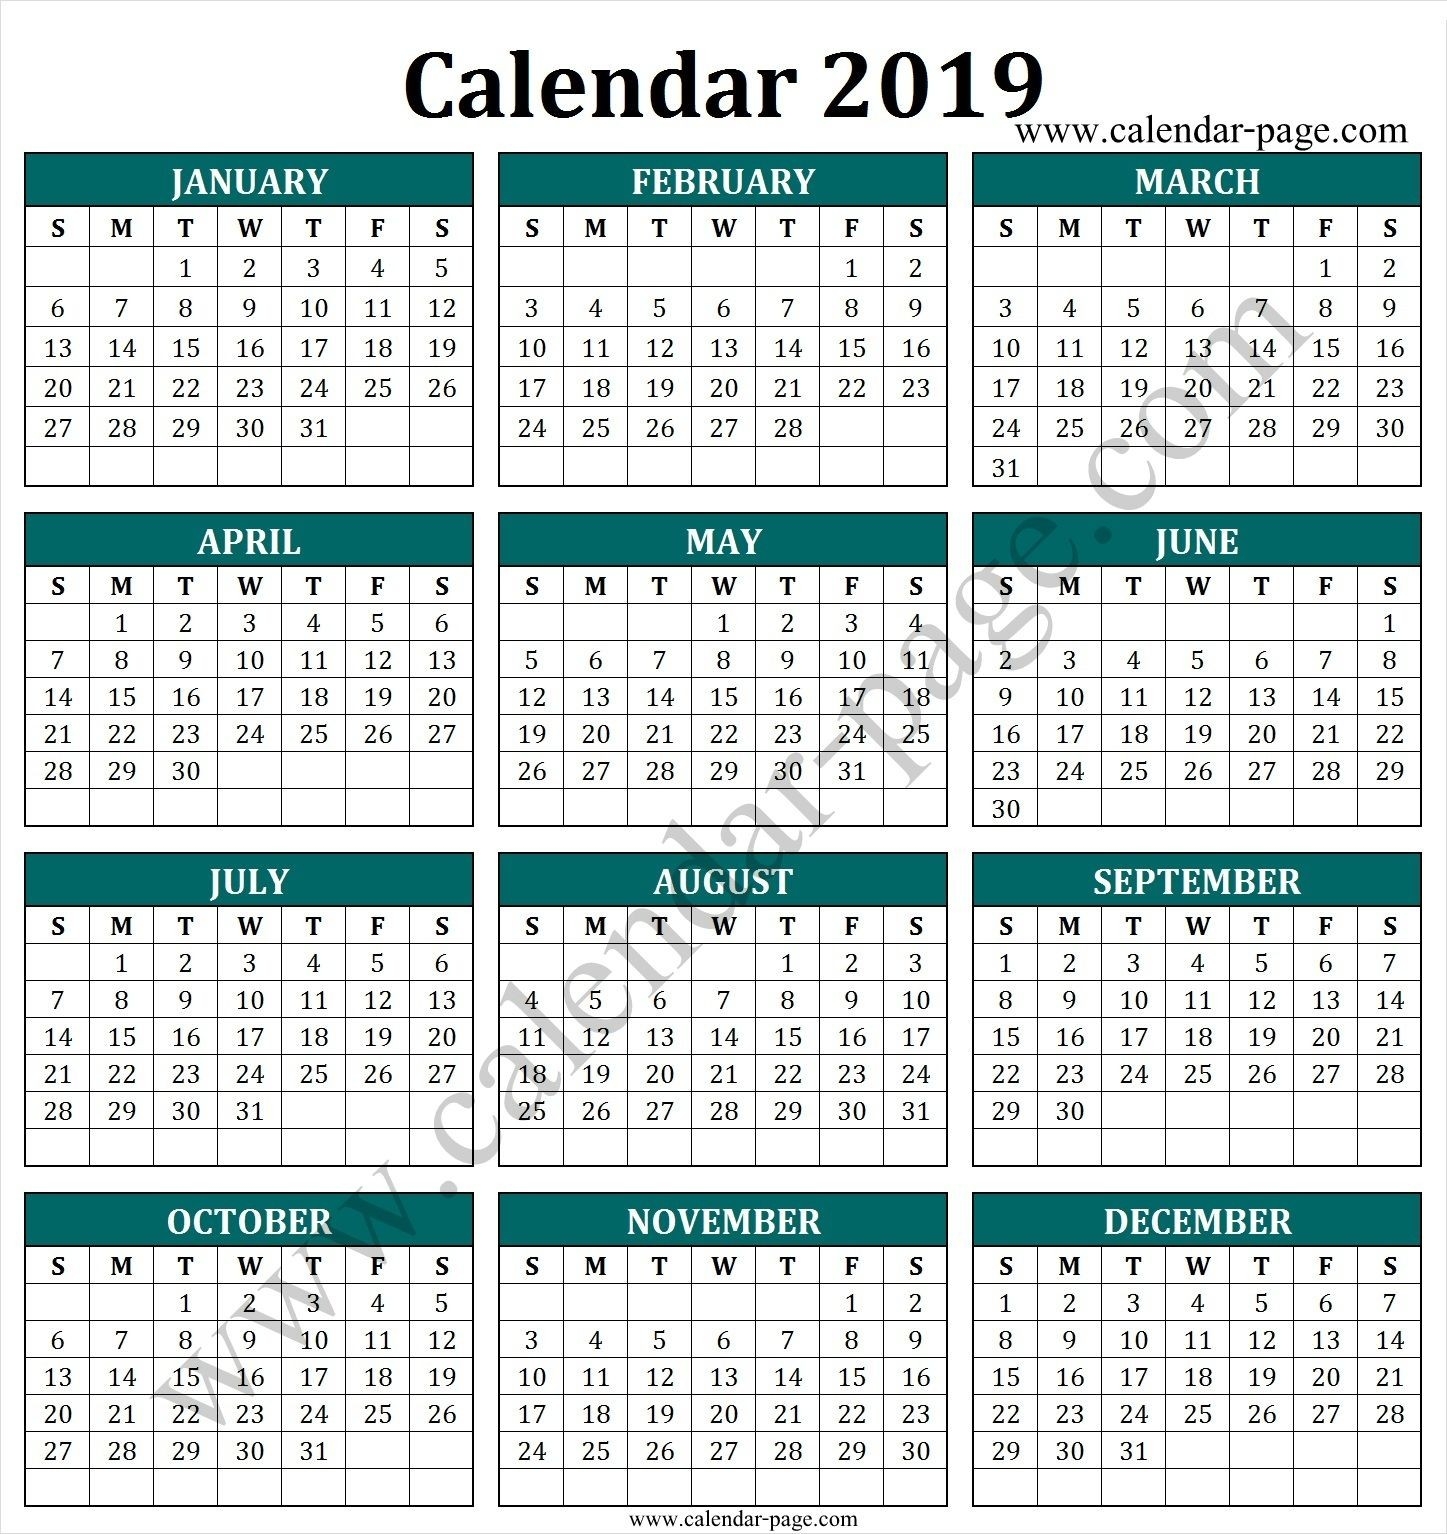 South Africa 2019 Calendar With Public Holidays | Calendar-South Africa Public Holidays Calendar